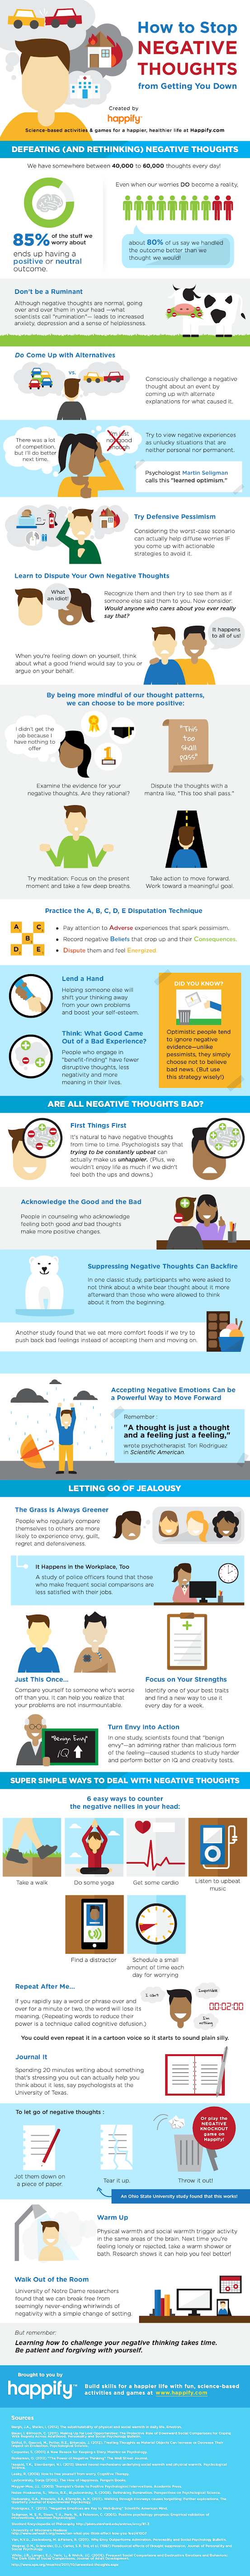 NEGATIVITY AND SOME INFOGRAPHICS ABOUT NEGATIVITY